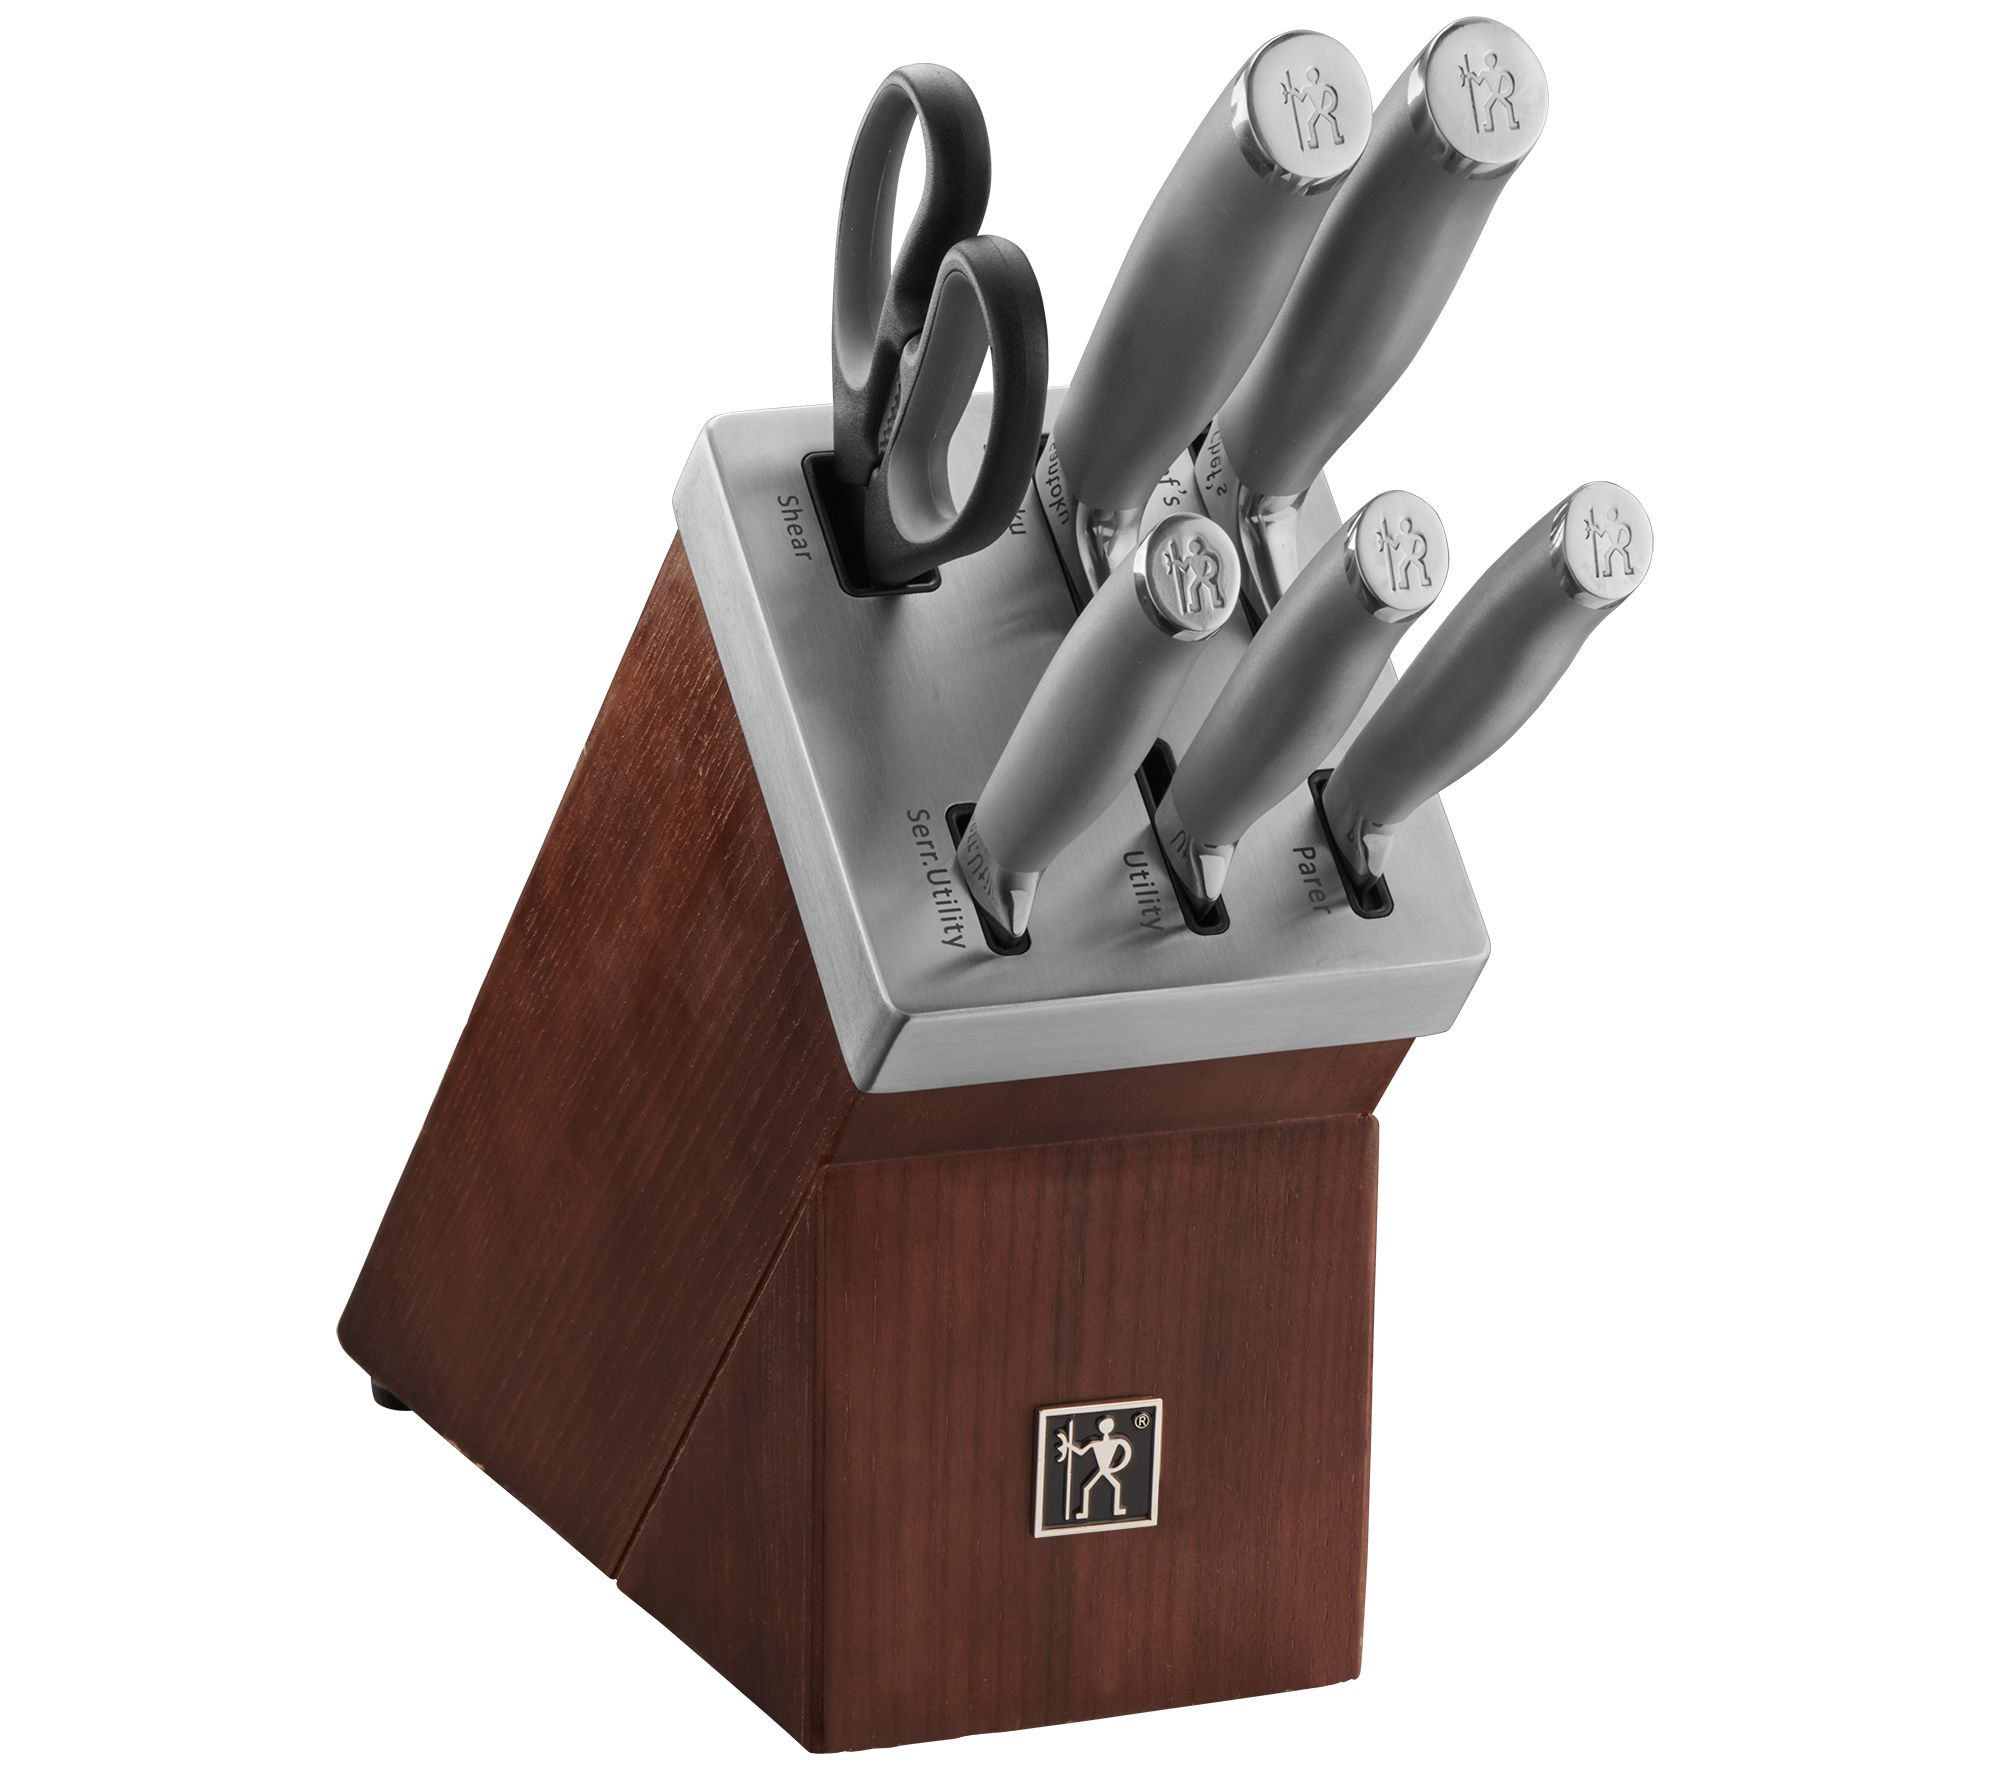 ZWILLING Now S 7-pc, Knife block set, pink